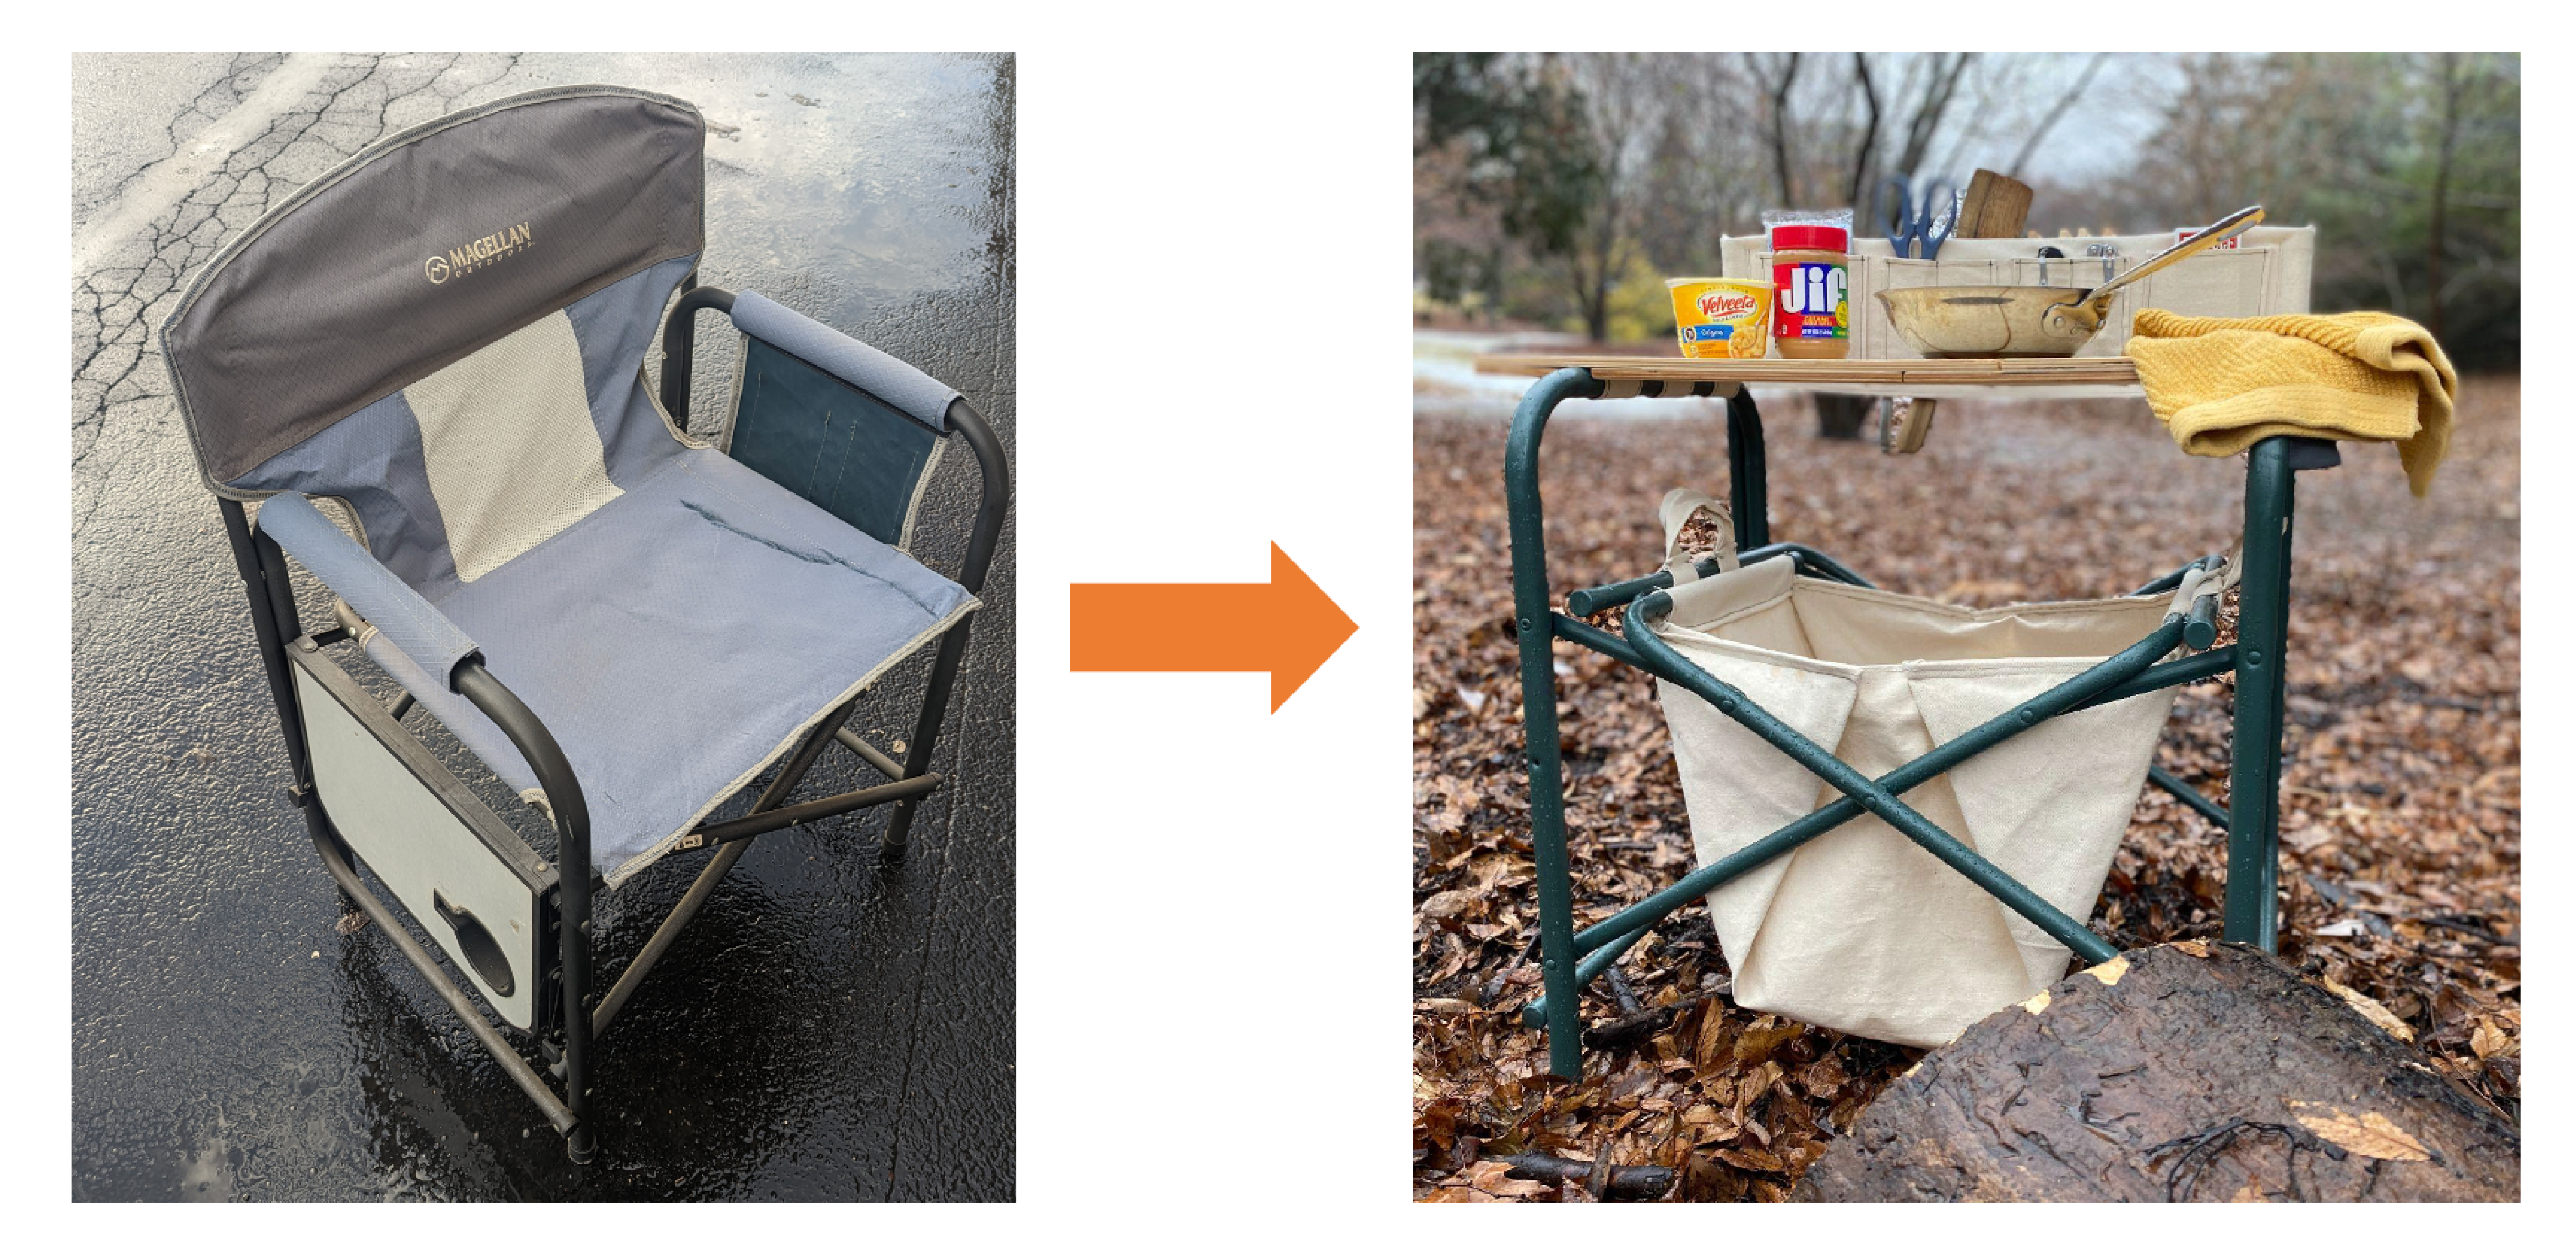 Image showing an old camping chair on the street and an orange arrow pointing to the repaired version in use as a camper’s table in nature.